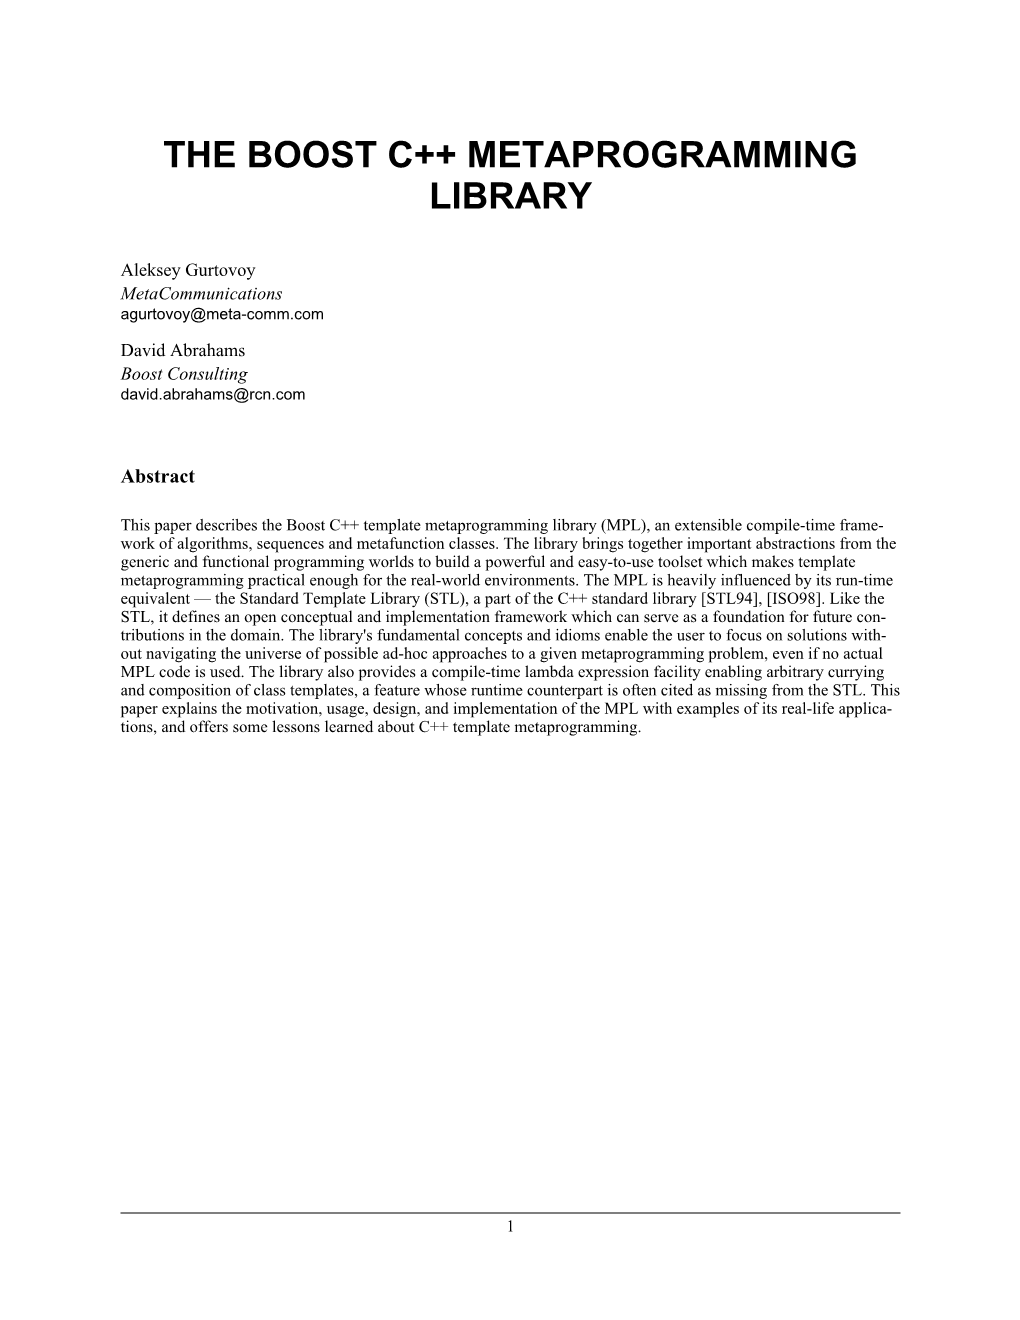 The Boost C++ Metaprogramming Library